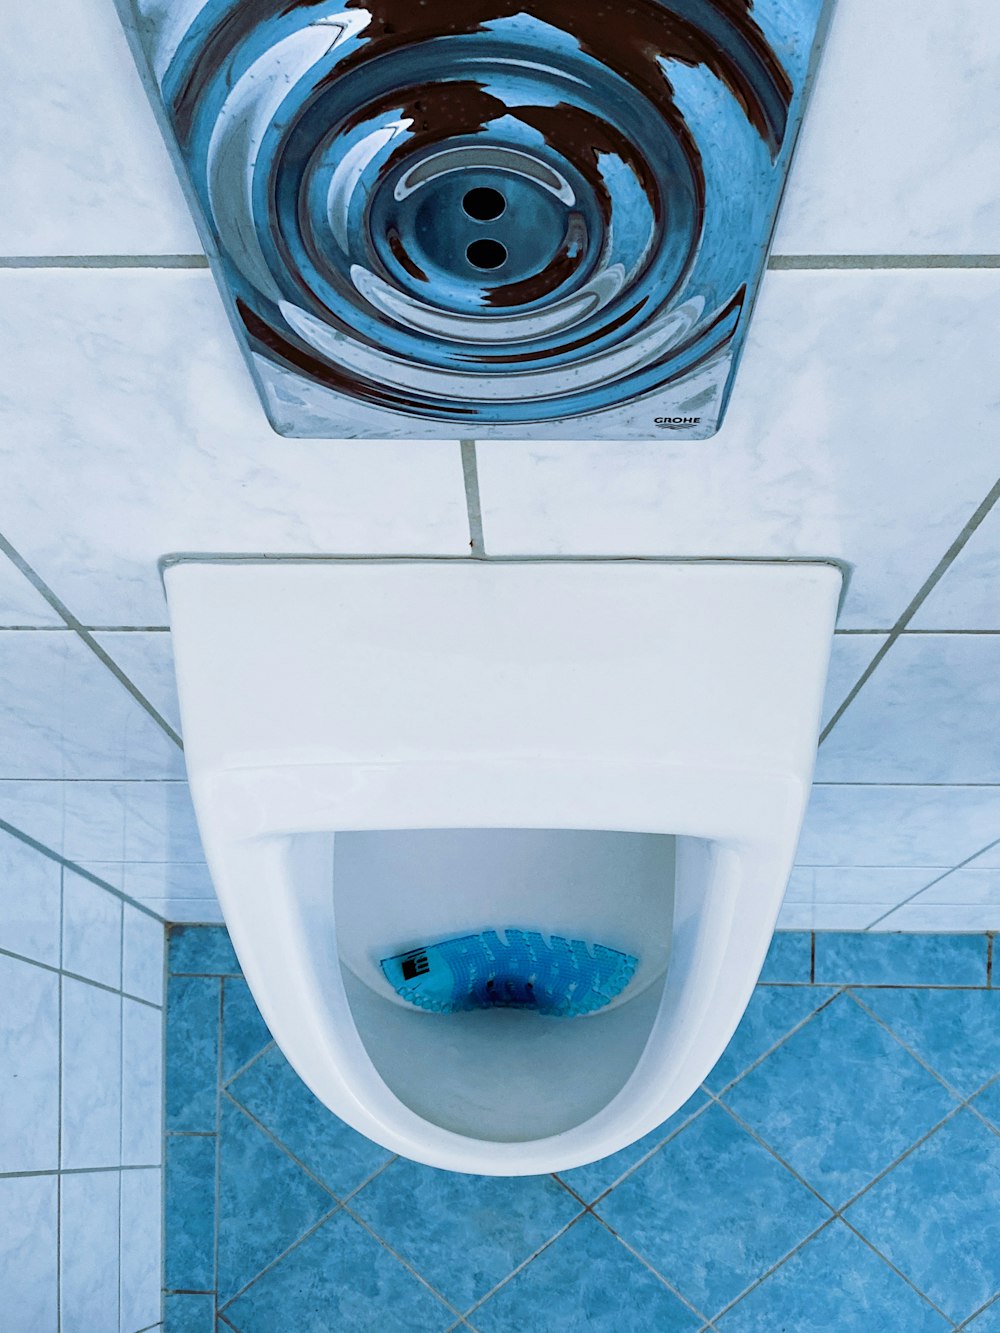 Toilet bowl flushing water, above view, tiled walls and floor. Stock Photo  by rawf8